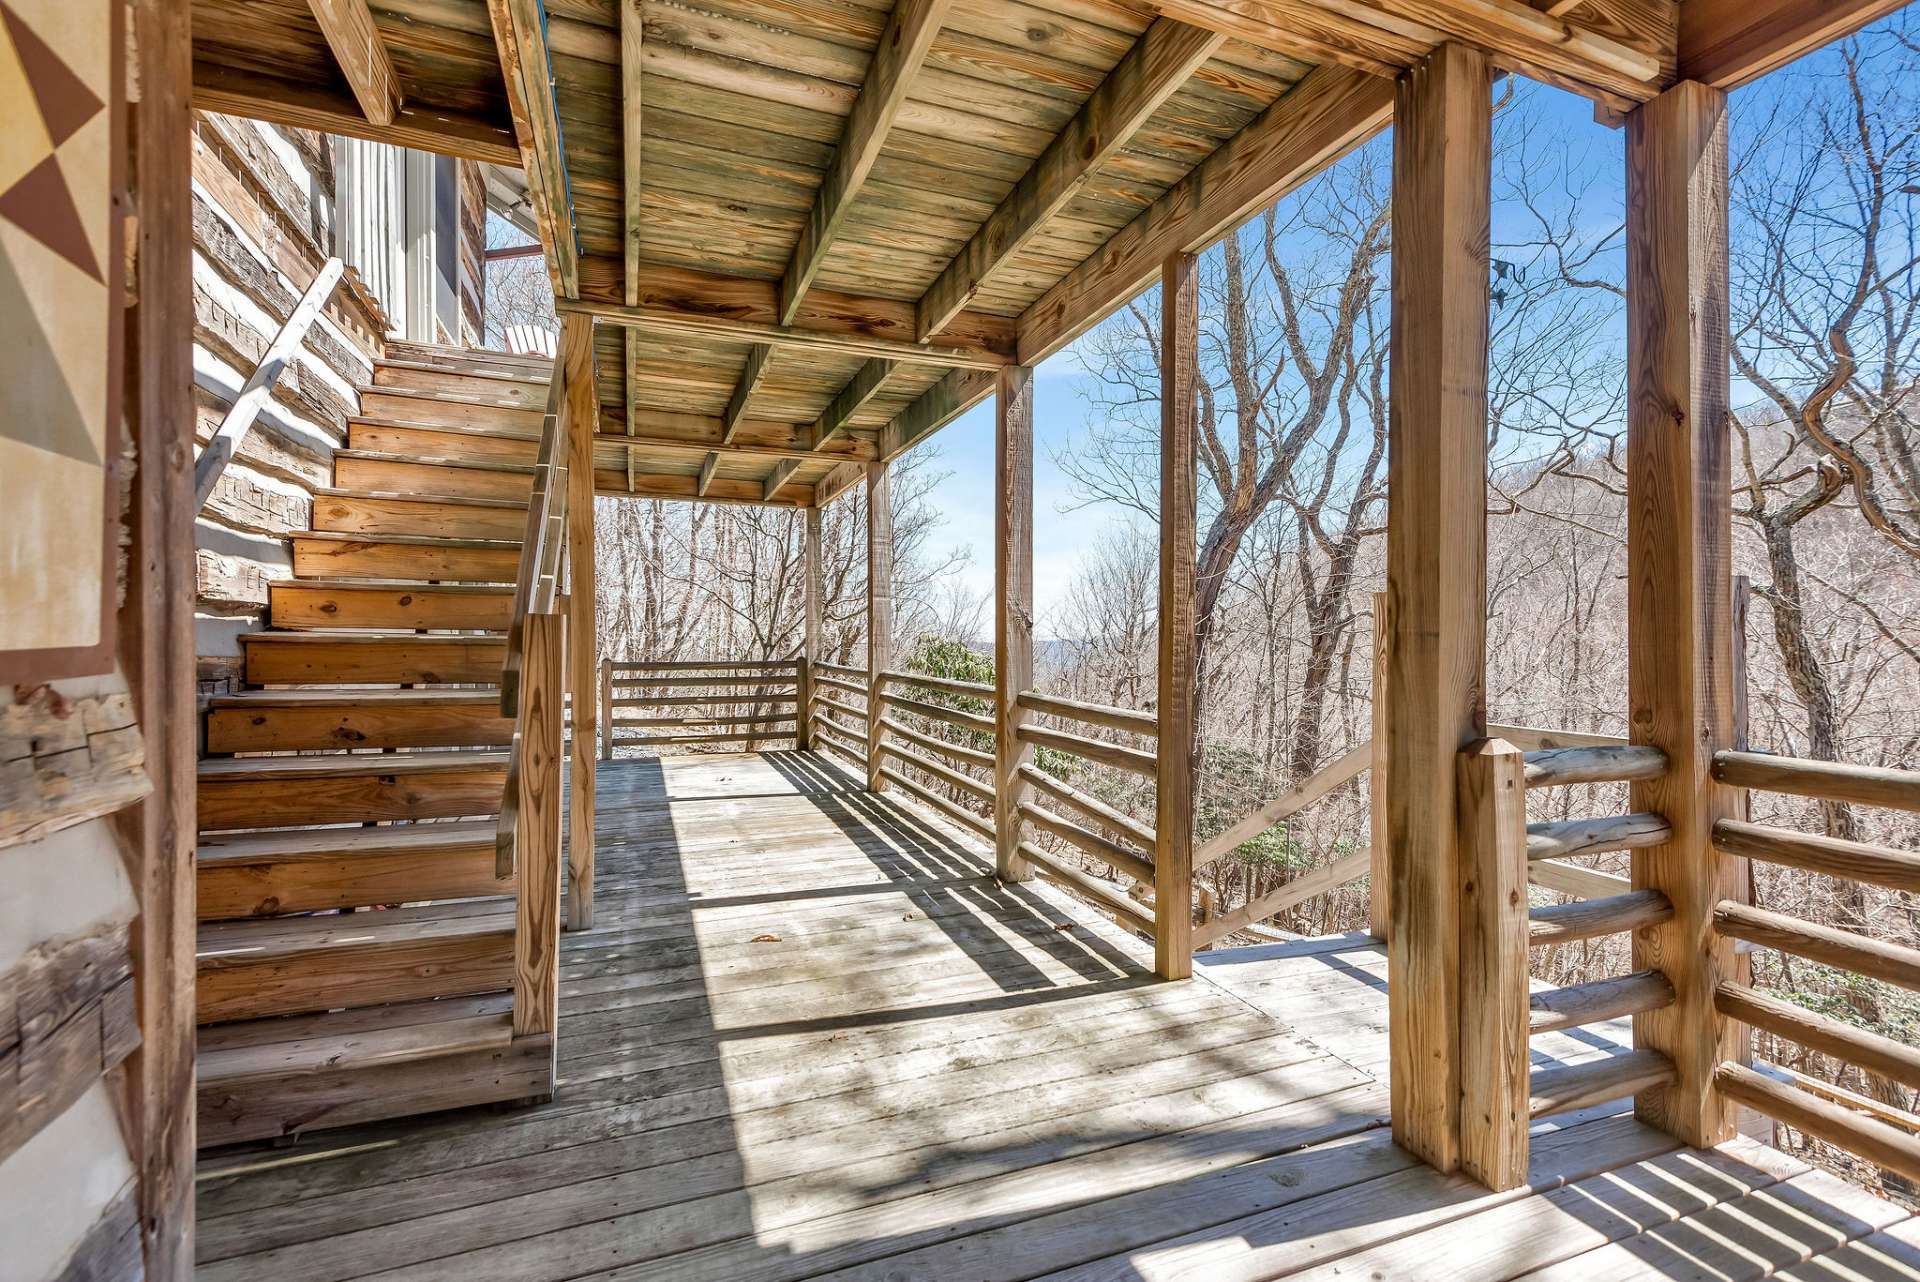 This staircase leads you back up to the main level deck and it's outdoor living area.